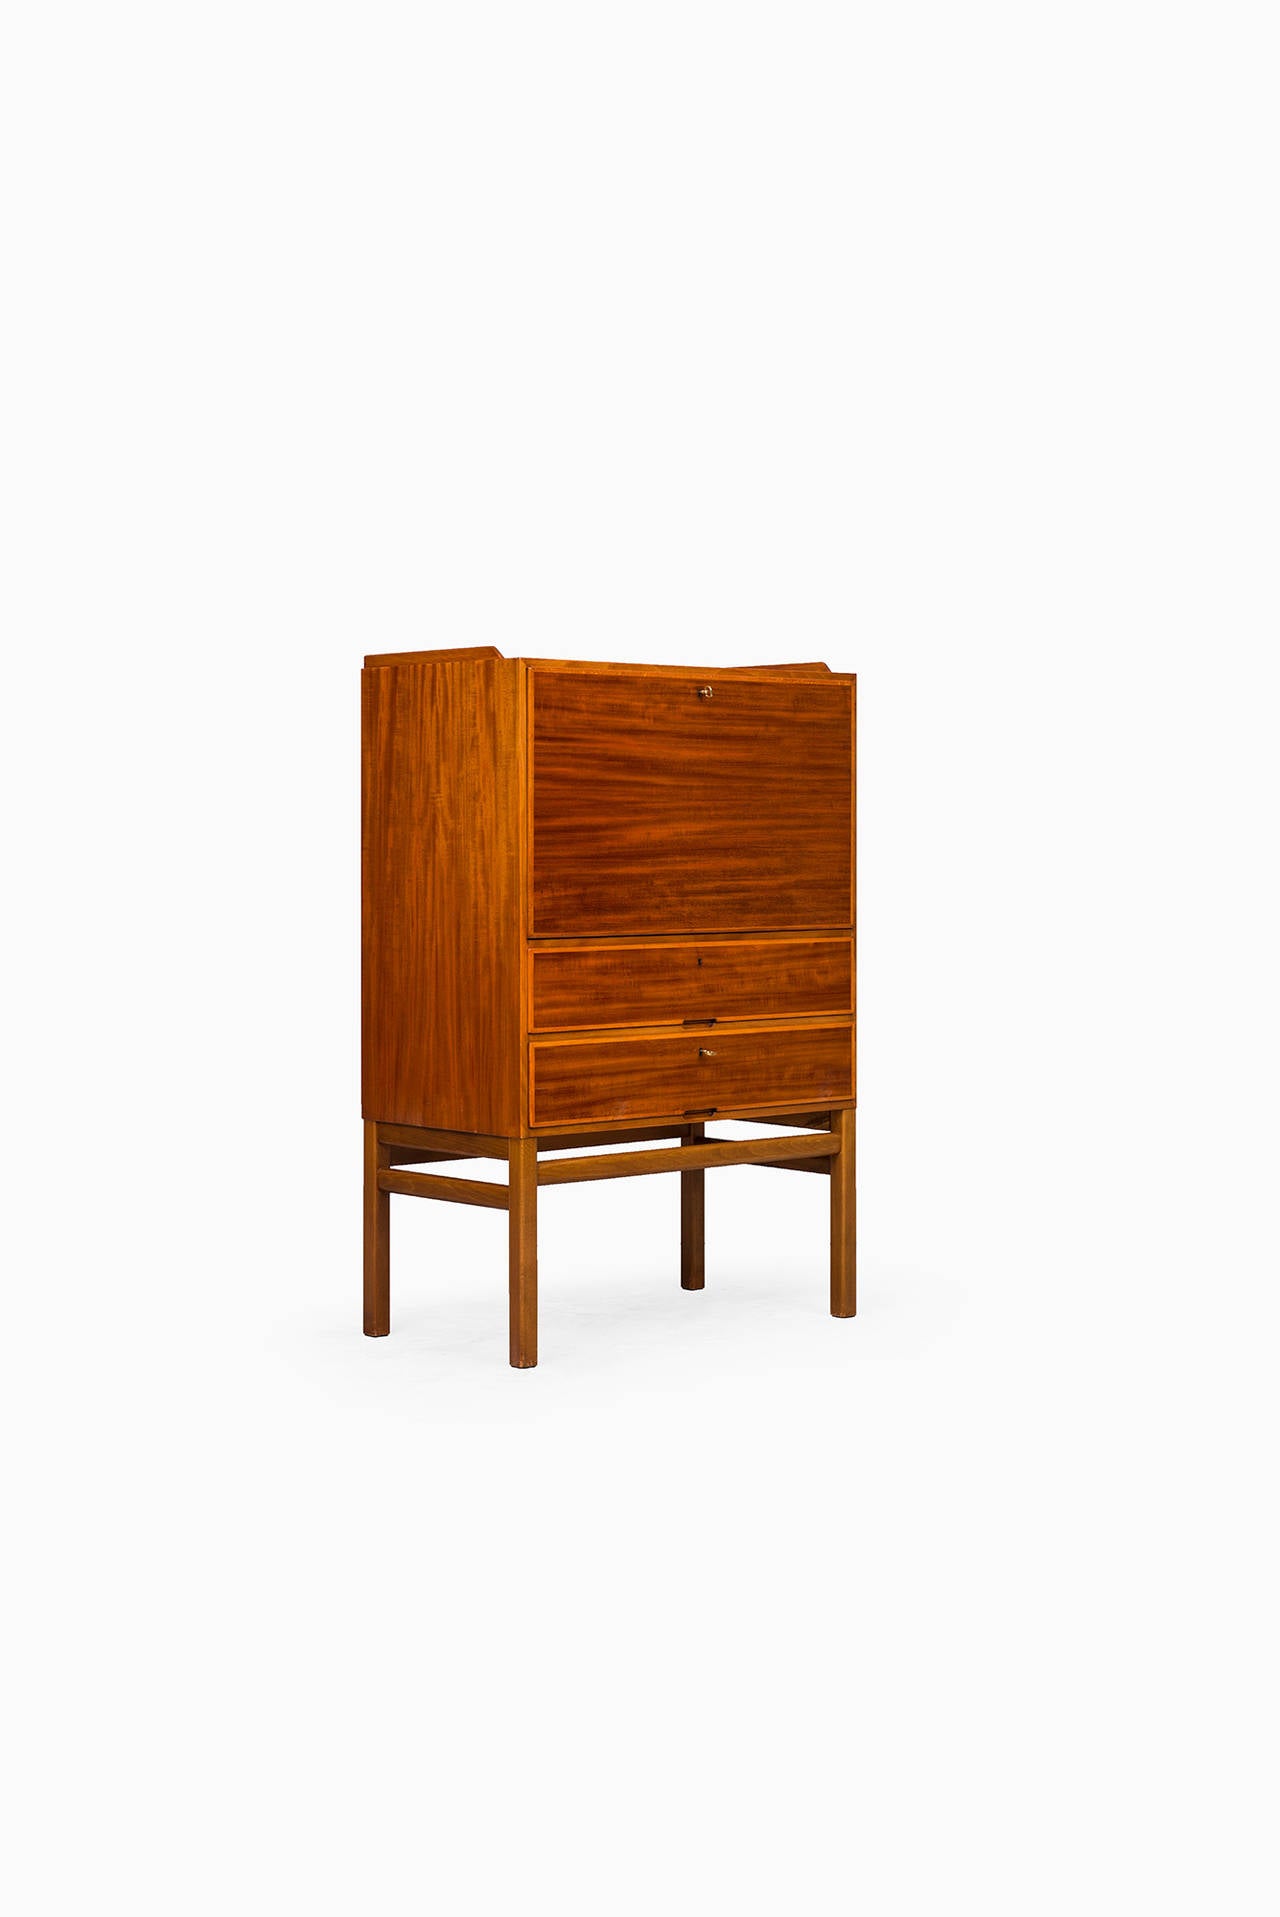 Rare Axel Larsson cabinet / secretaire with flip-down desk in mahogany and beech. Produced by Bodafors in Sweden.